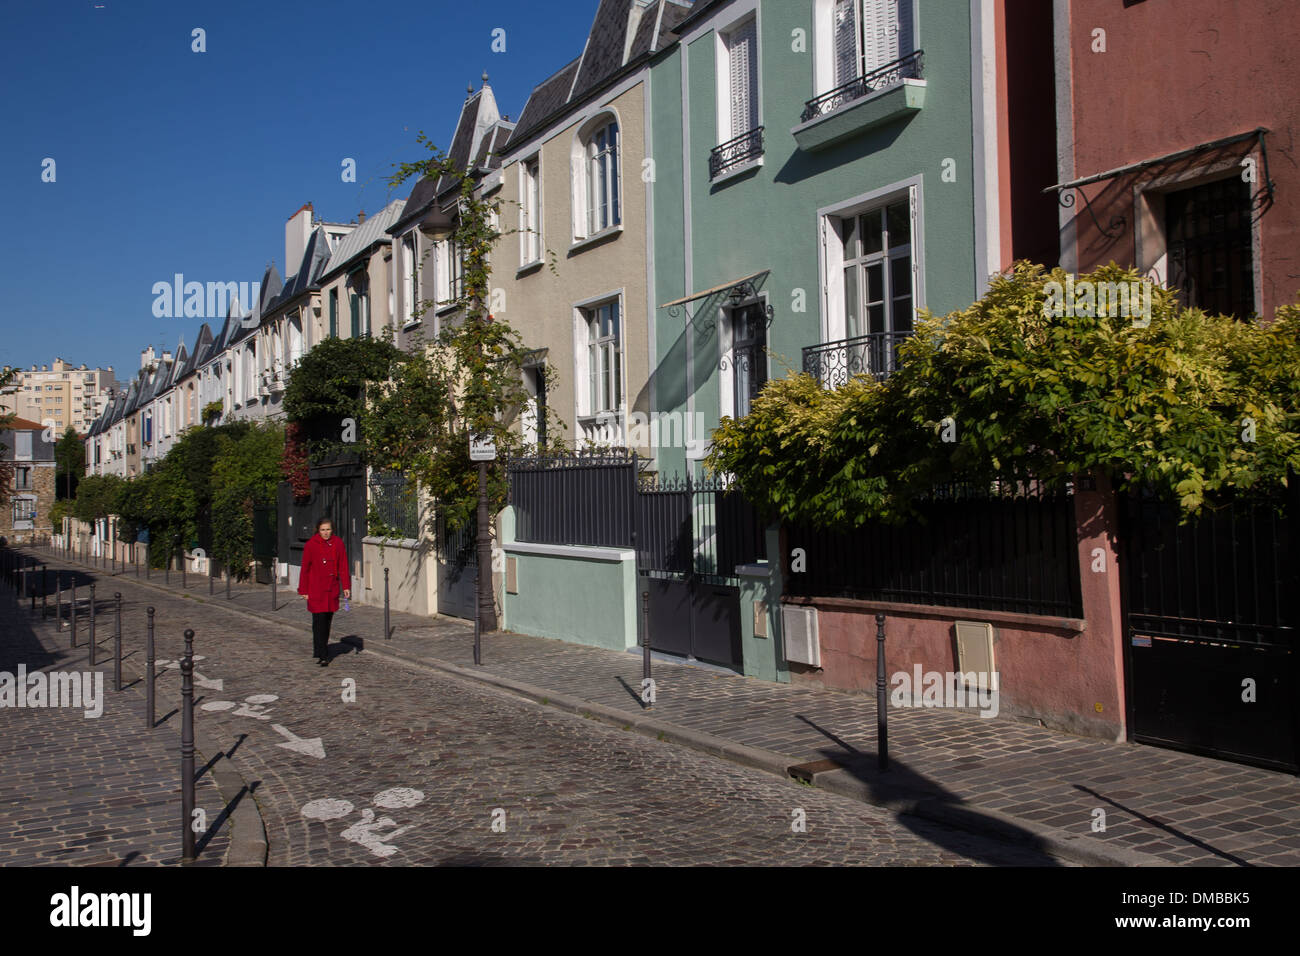 THE STREET RUE DIEULAFOY, SITUATED IN THE MAISON-BLANCHE QUARTER, RESIDENTIAL AREA, 13TH ARRONDISSEMENT, PARIS (75), ILE-DE-FRANCE, FRANCE Stock Photo